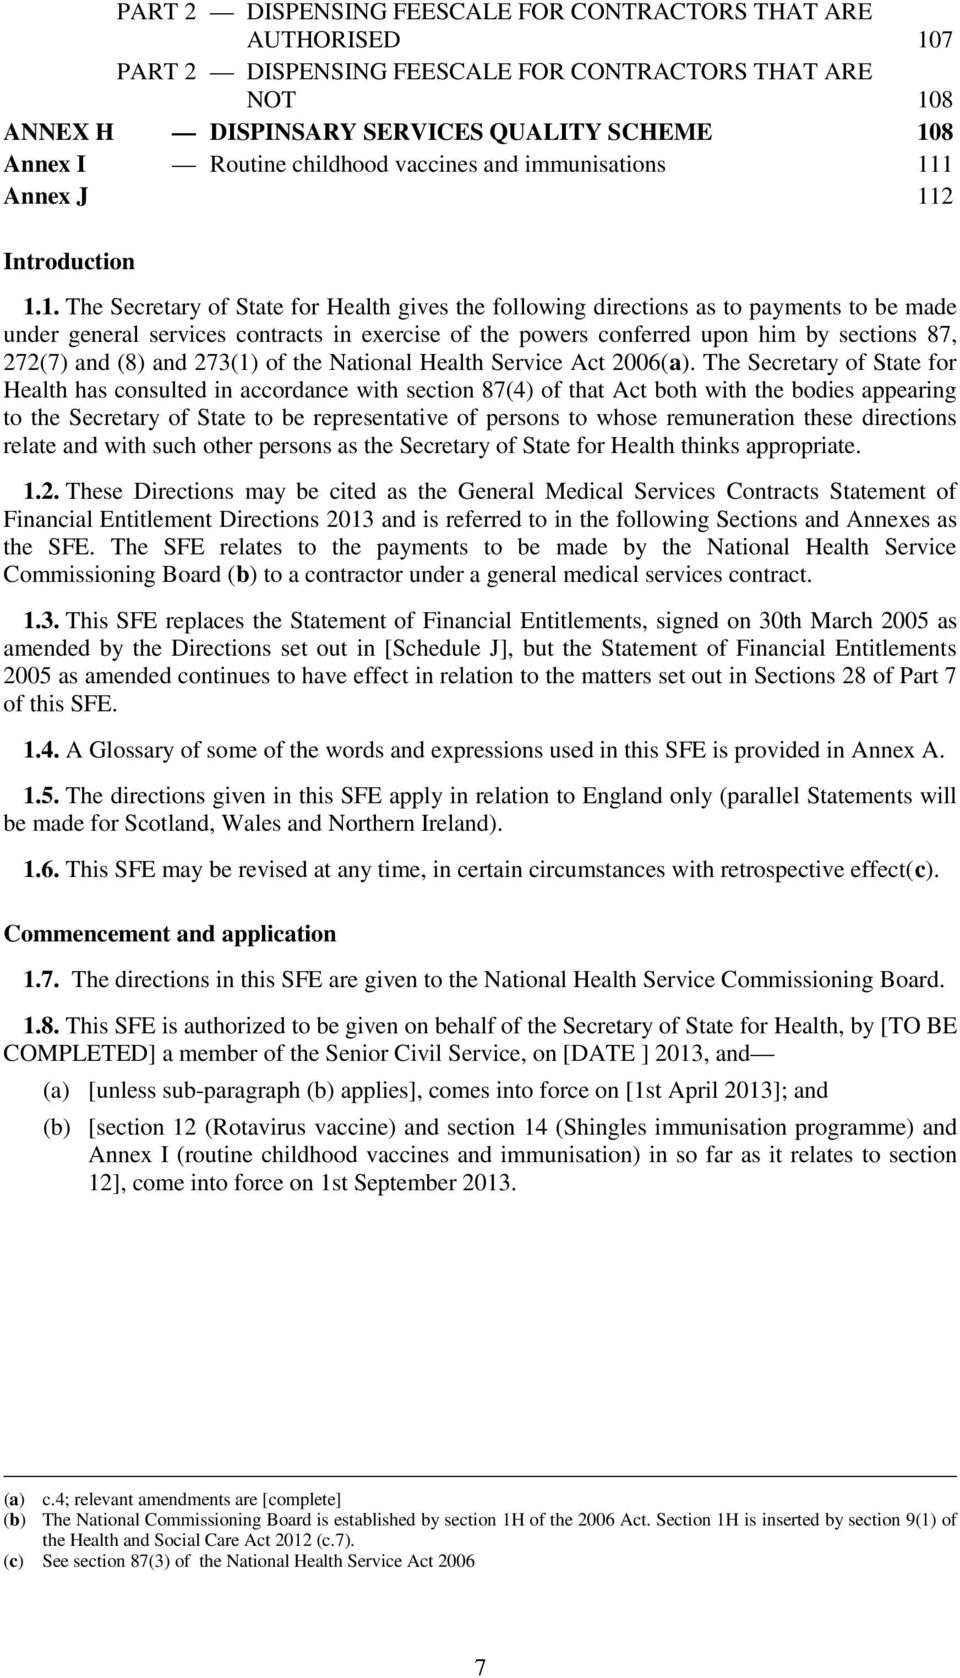 1 Annex J 112 Introduction 1.1. The Secretary of State for Health gives the following directions as to payments to be made under general services contracts in exercise of the powers conferred upon